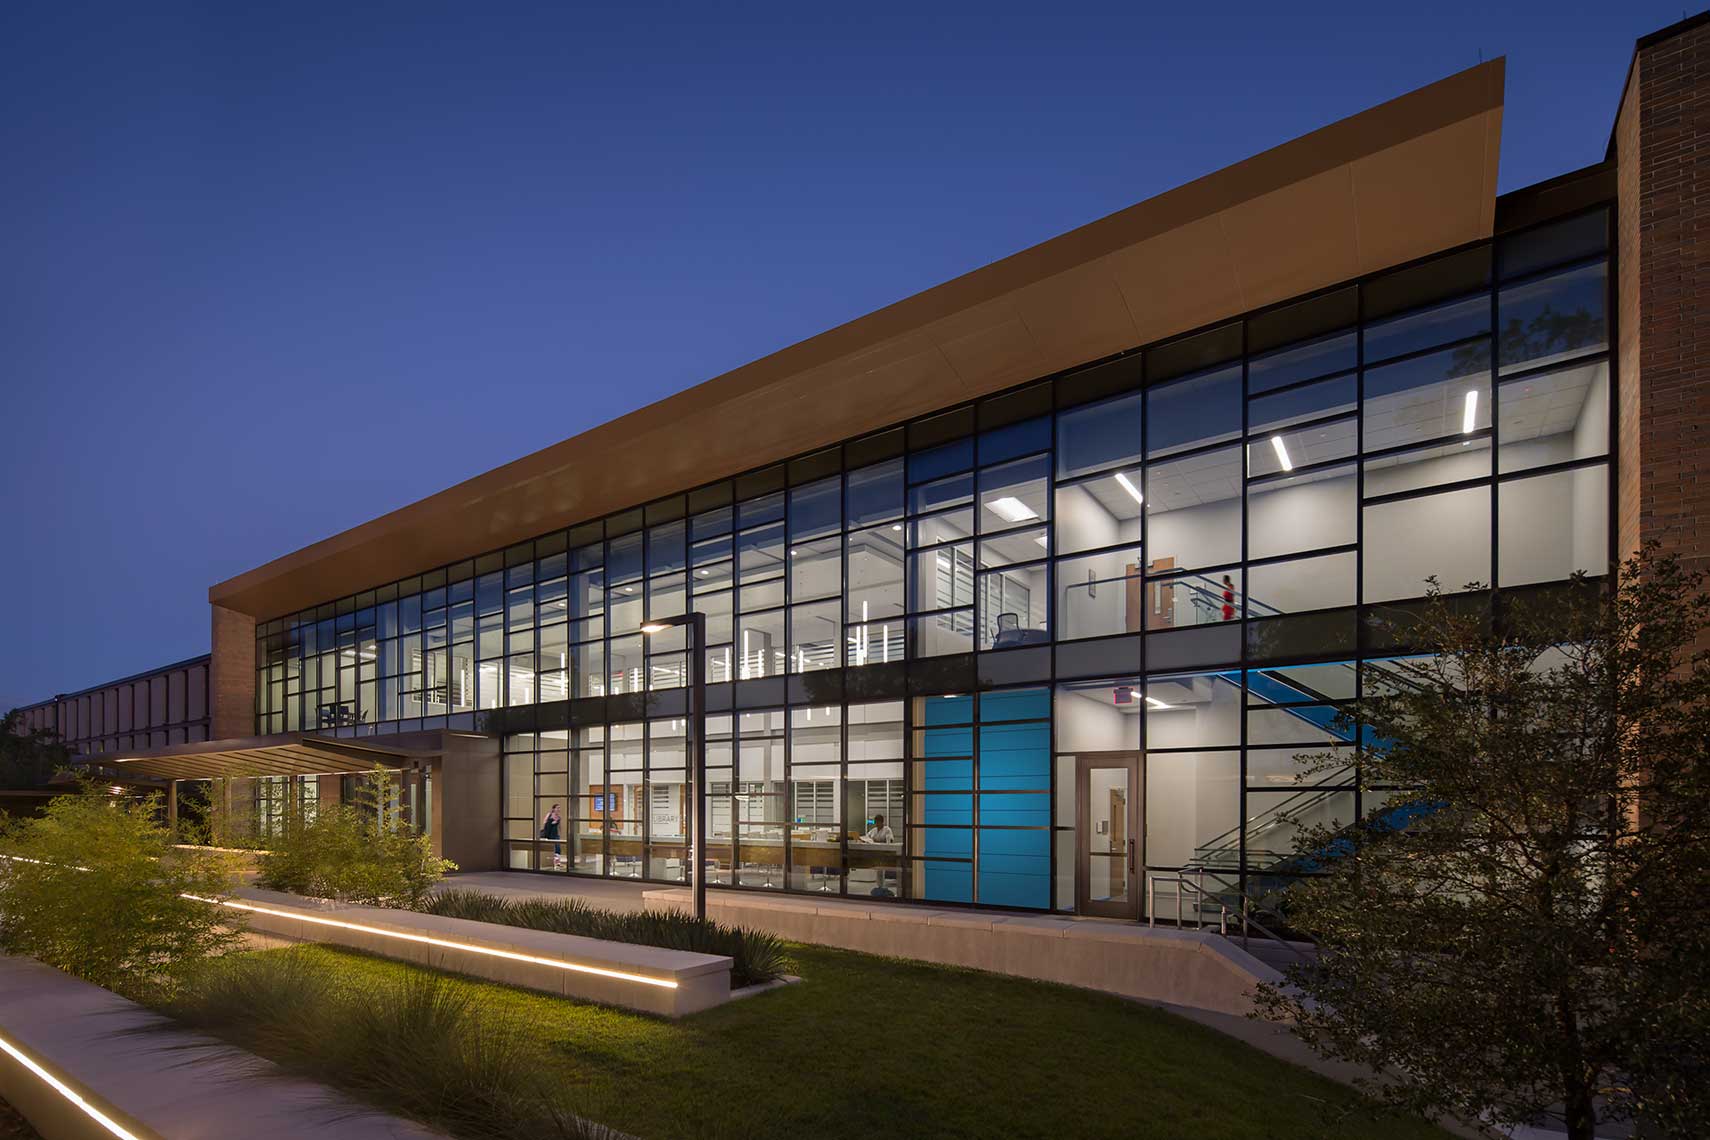 Midlands Tech | Beltline Campus Learning Resource Center<br>Quackenbush Architects + Planners / Ratio / Randolph Builders